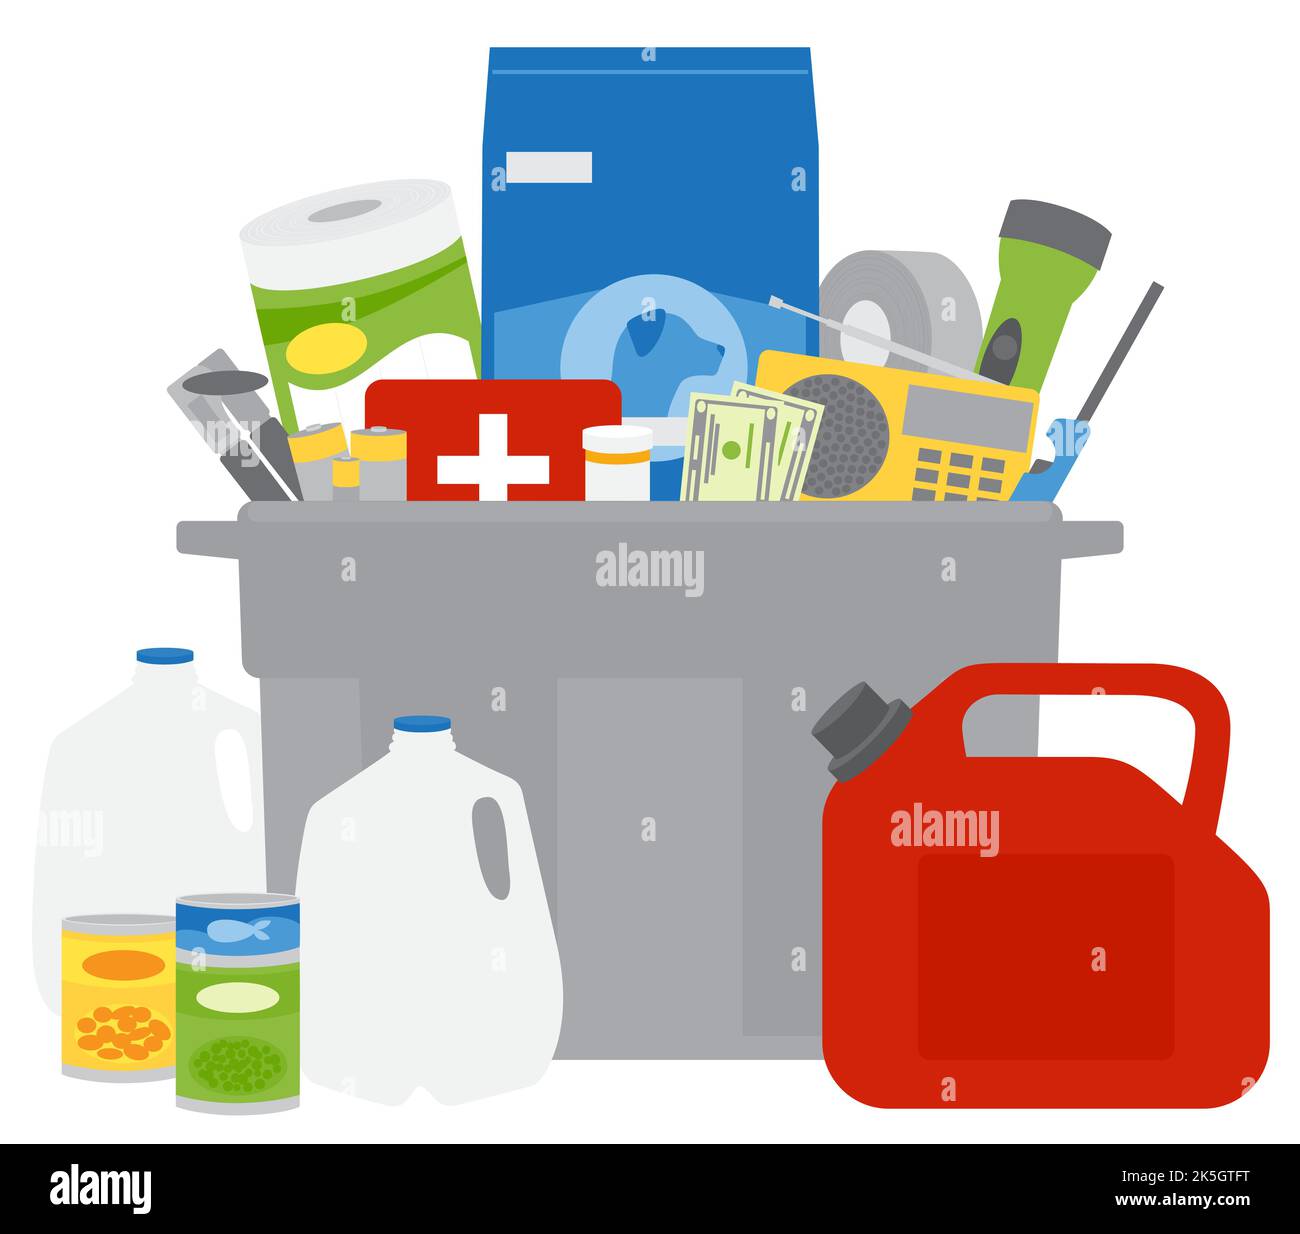 A set of emergency supplies, hurricane and disaster preparedness items in a plastic storage bin. Stock Vector